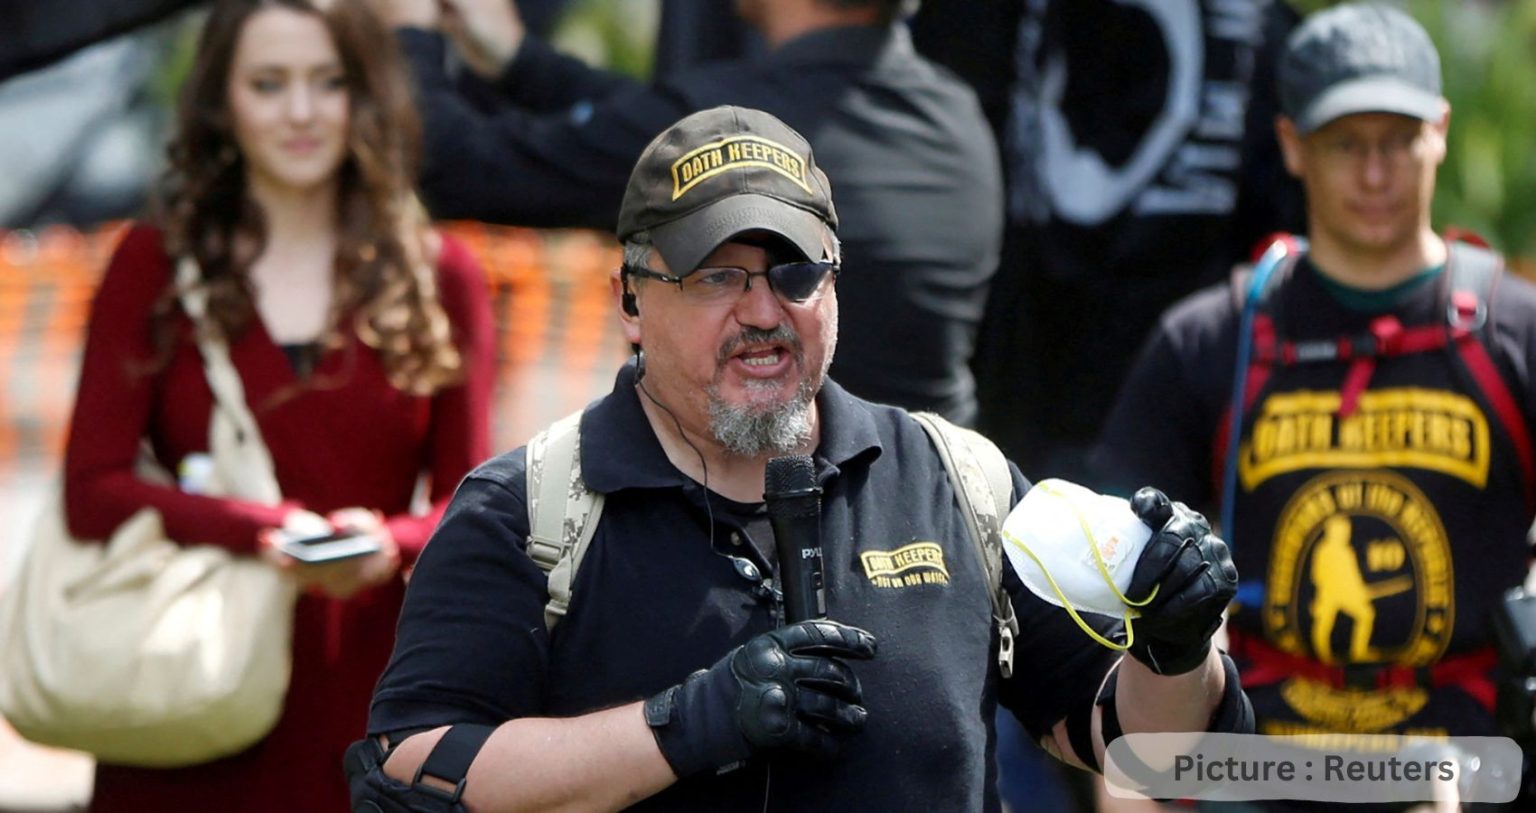 Rhodes, Leader Of Oath Keepers Is Guilty Of Jan. 6 Seditious Conspiracy